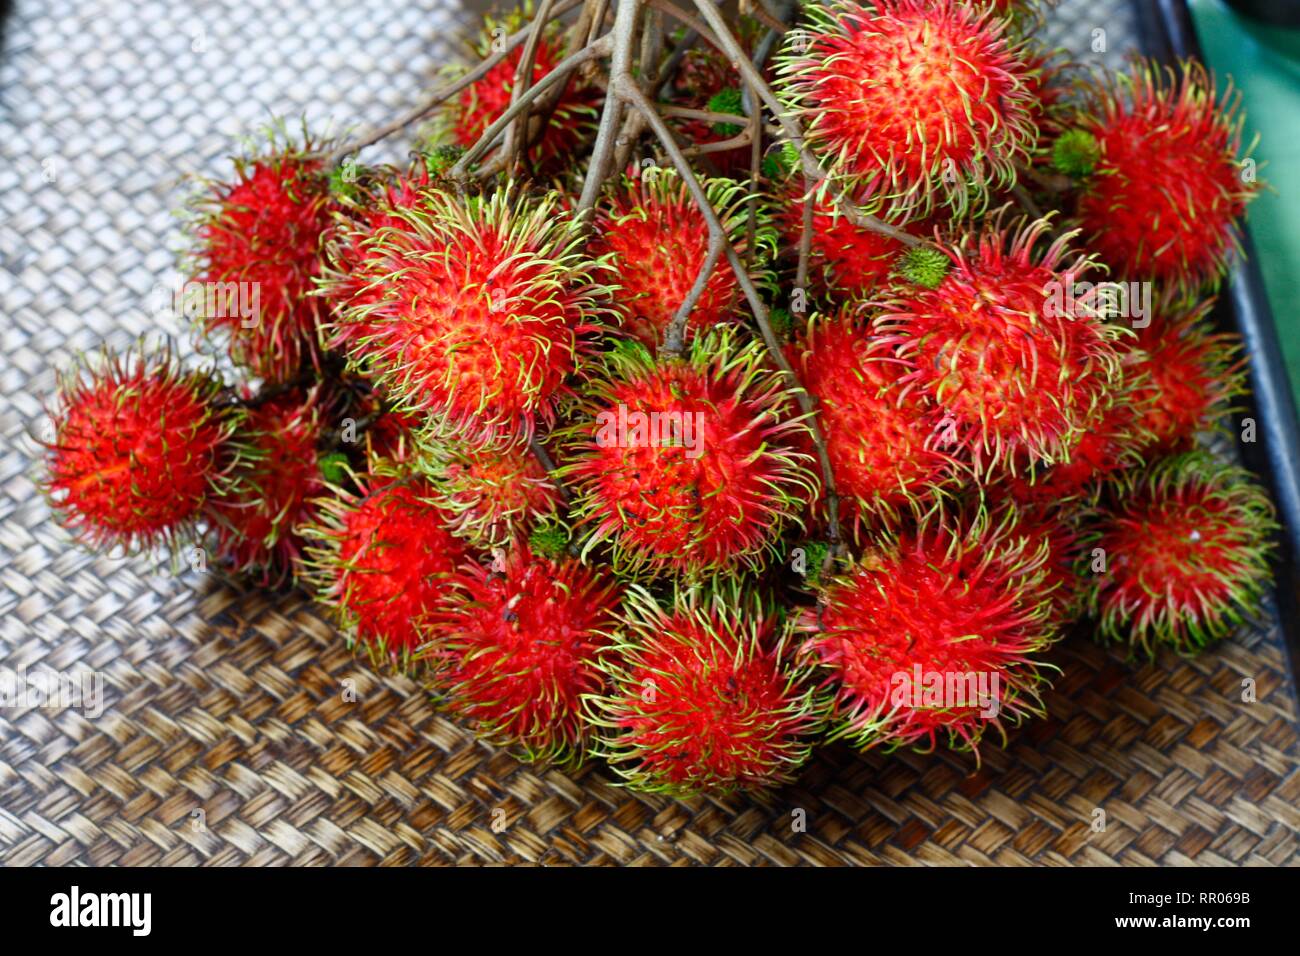 Bunch of fresh ramboutan, rouge et hairly fruits tropicaux Banque D'Images